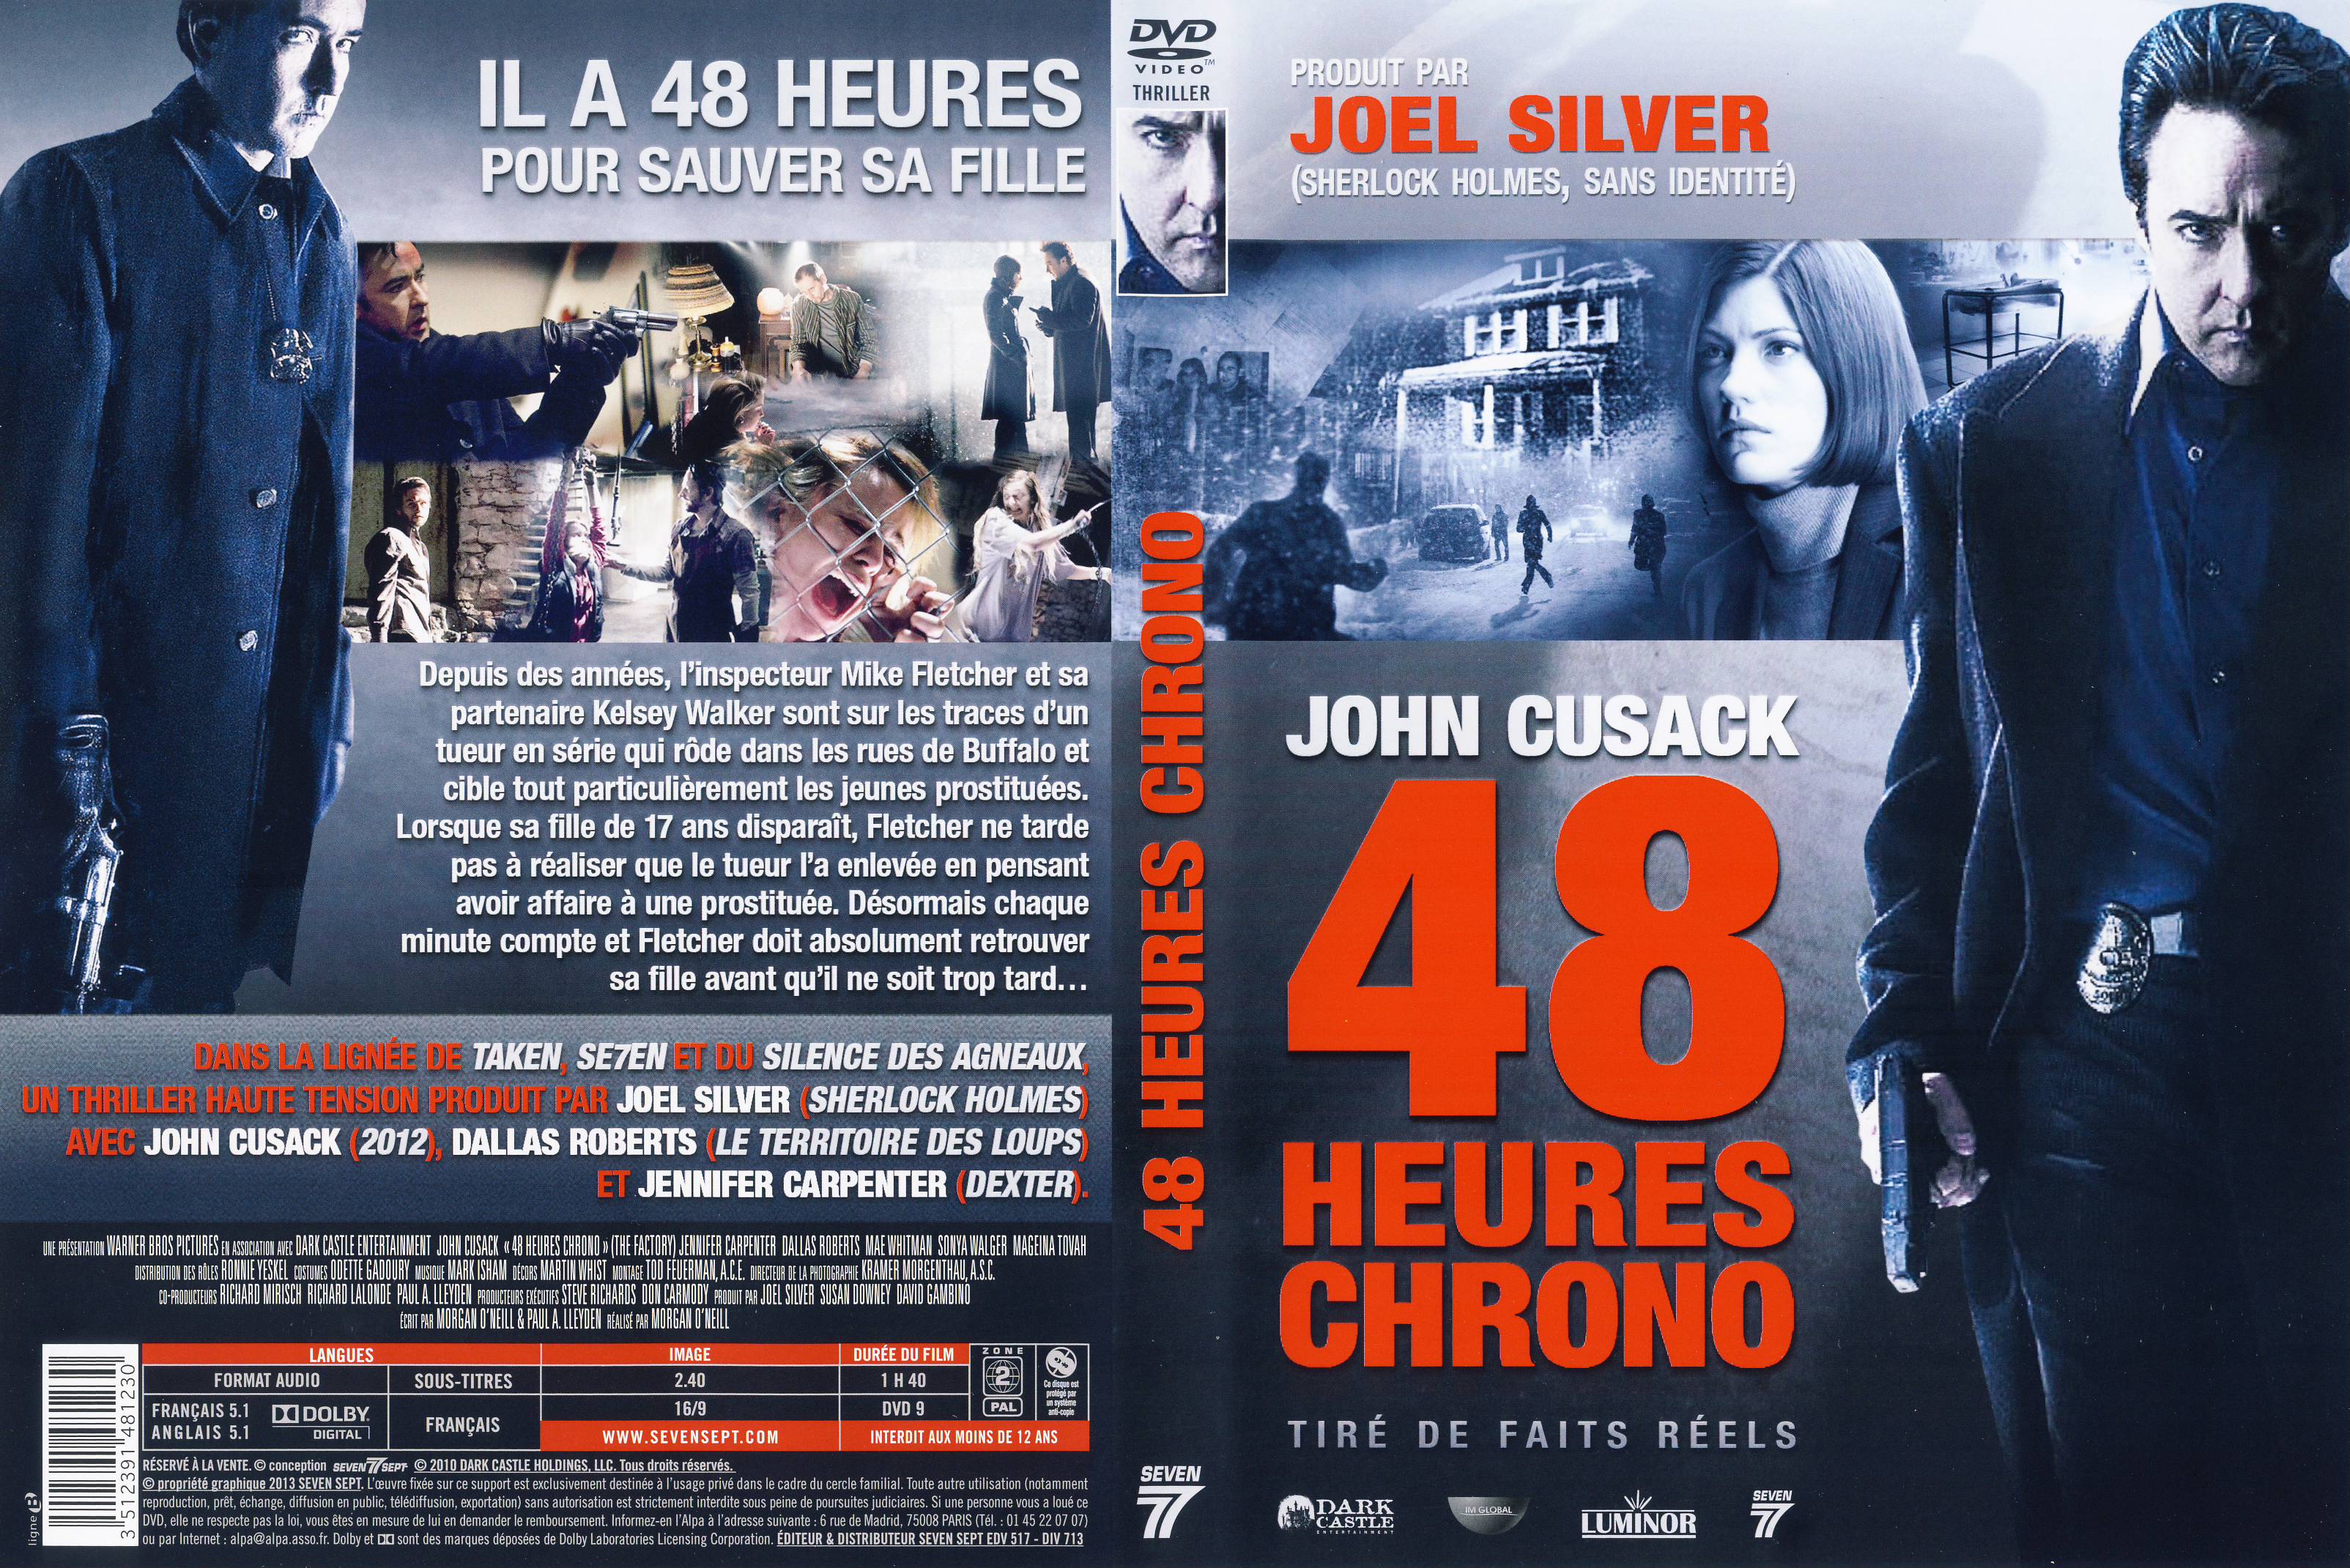 Jaquette DVD 48 Heures chrono